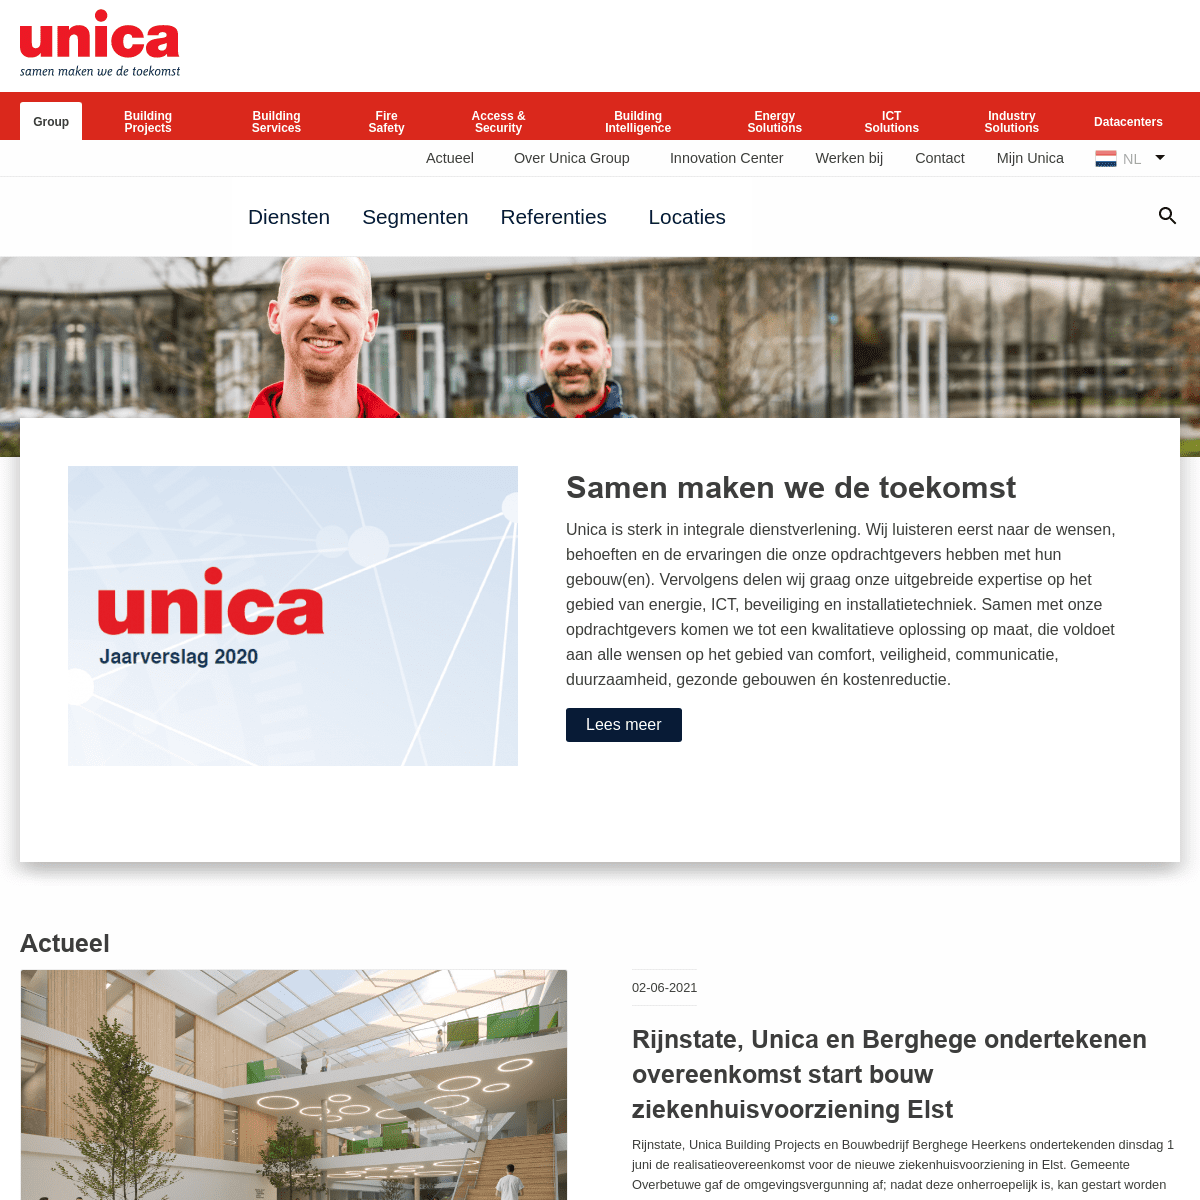 A complete backup of https://unica.nl